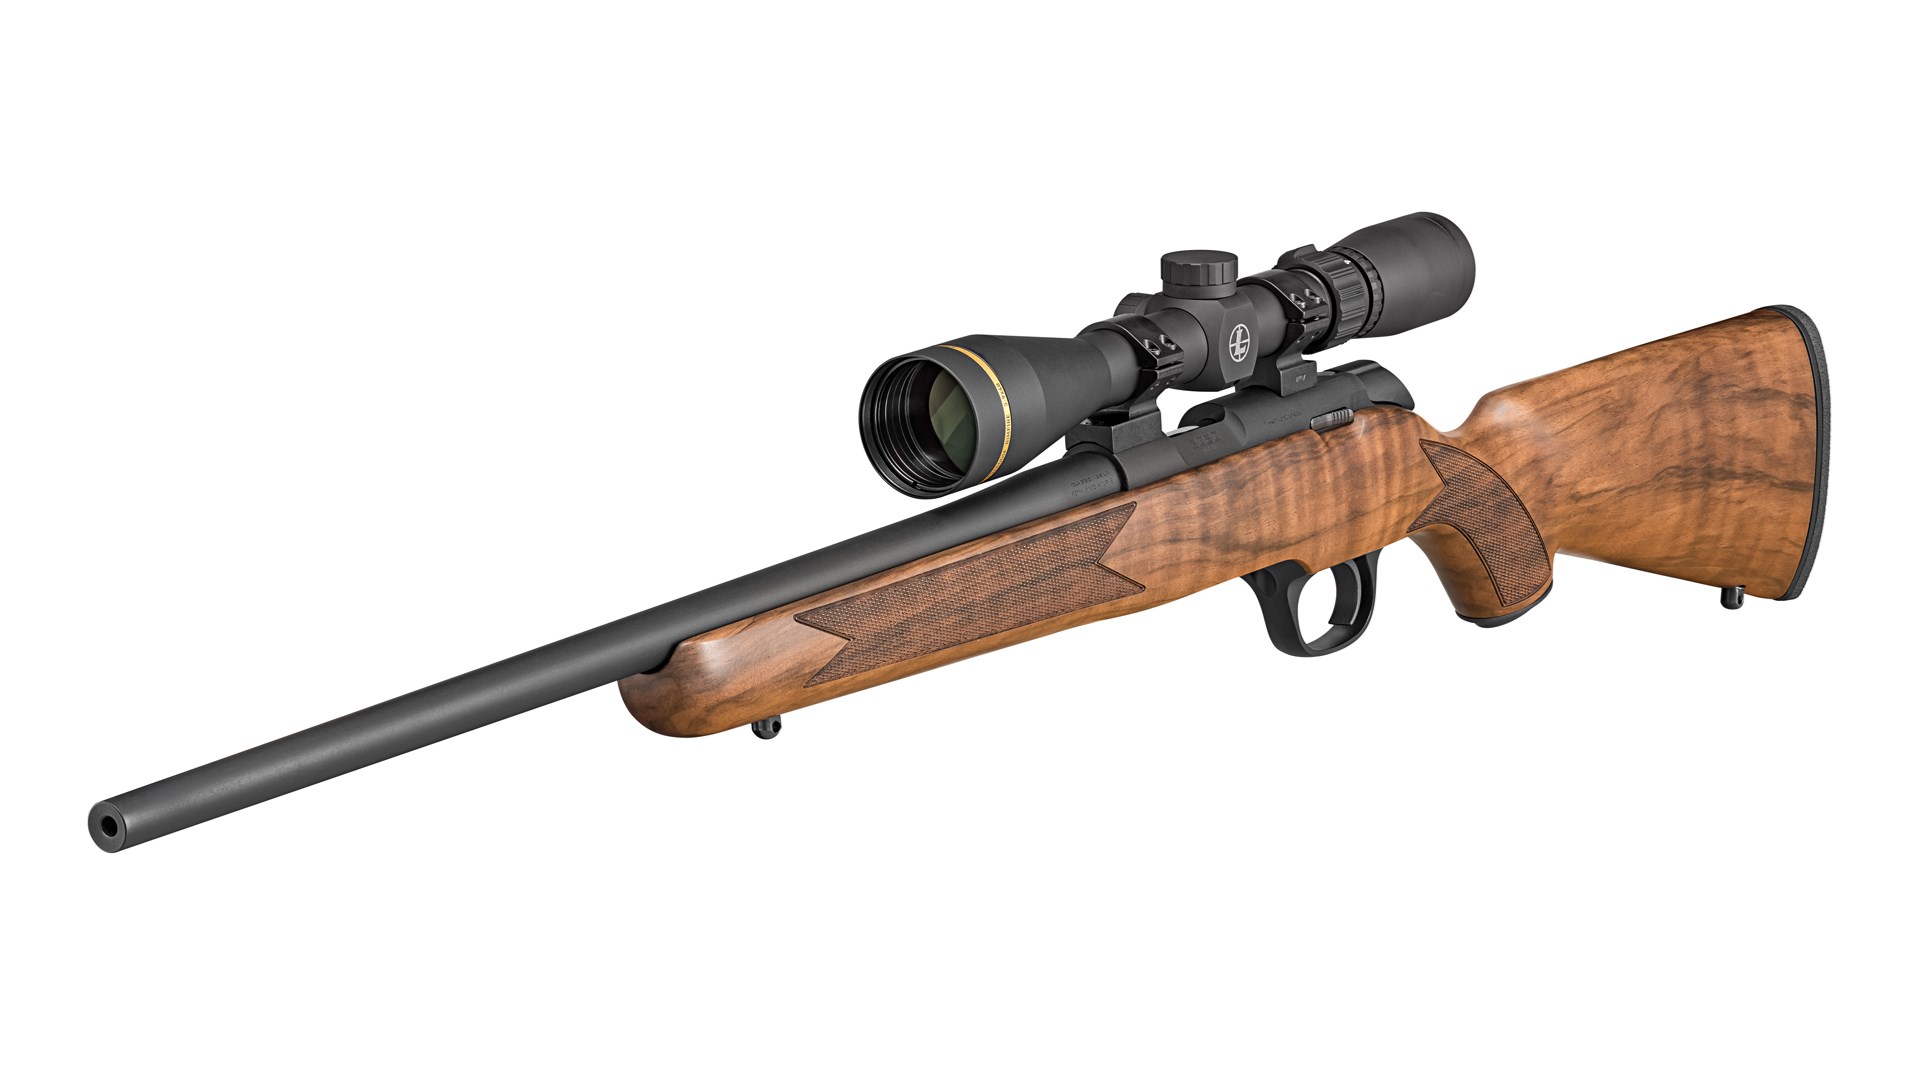 Left side angled shot of the Springfield Model 2020 Rimfire Sporter with a Leupold scope mounted.